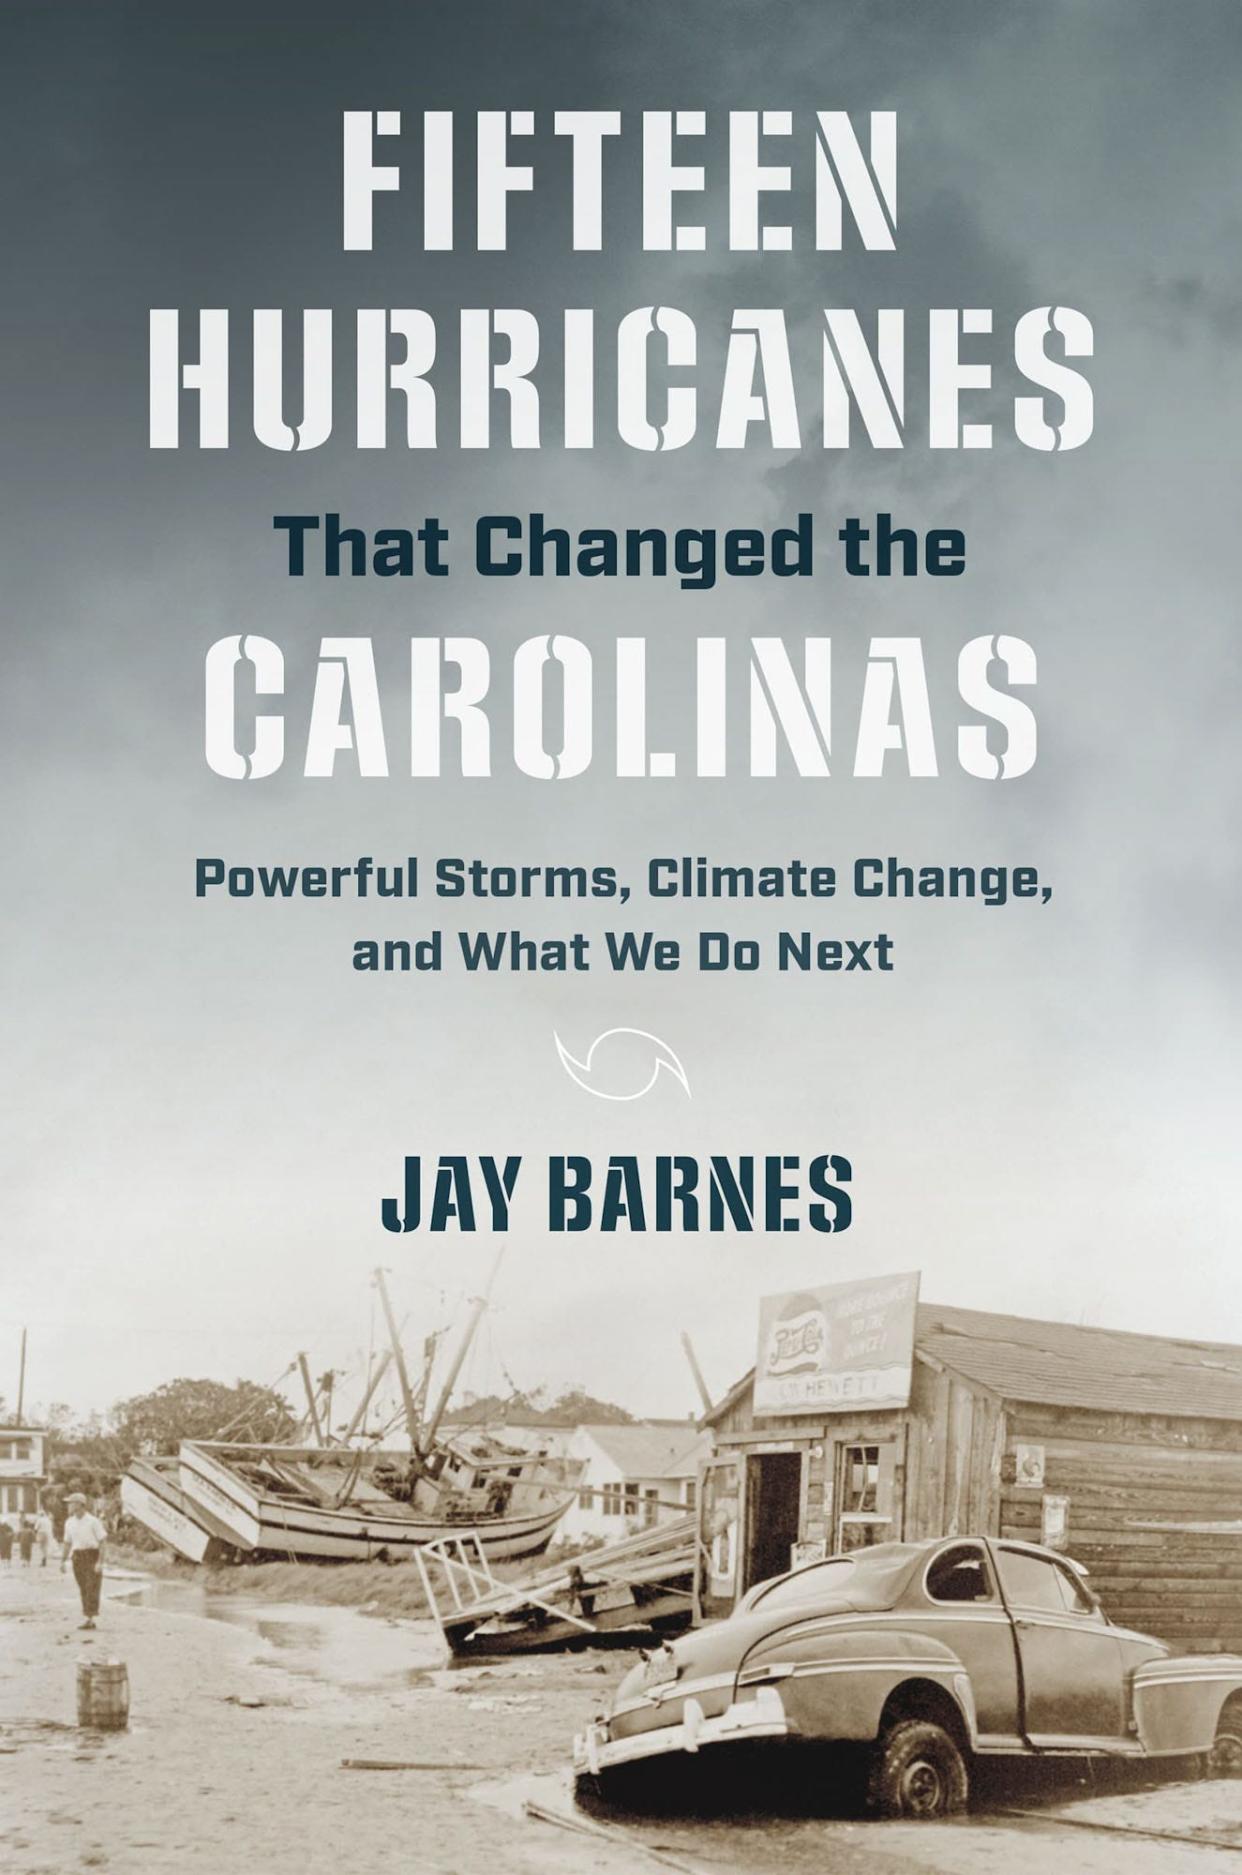 Jay Barnes is the author of new book "Fifteen Hurricanes That Changed the Carolinas: Powerful Storms, Climate Change, and What We Do Next."